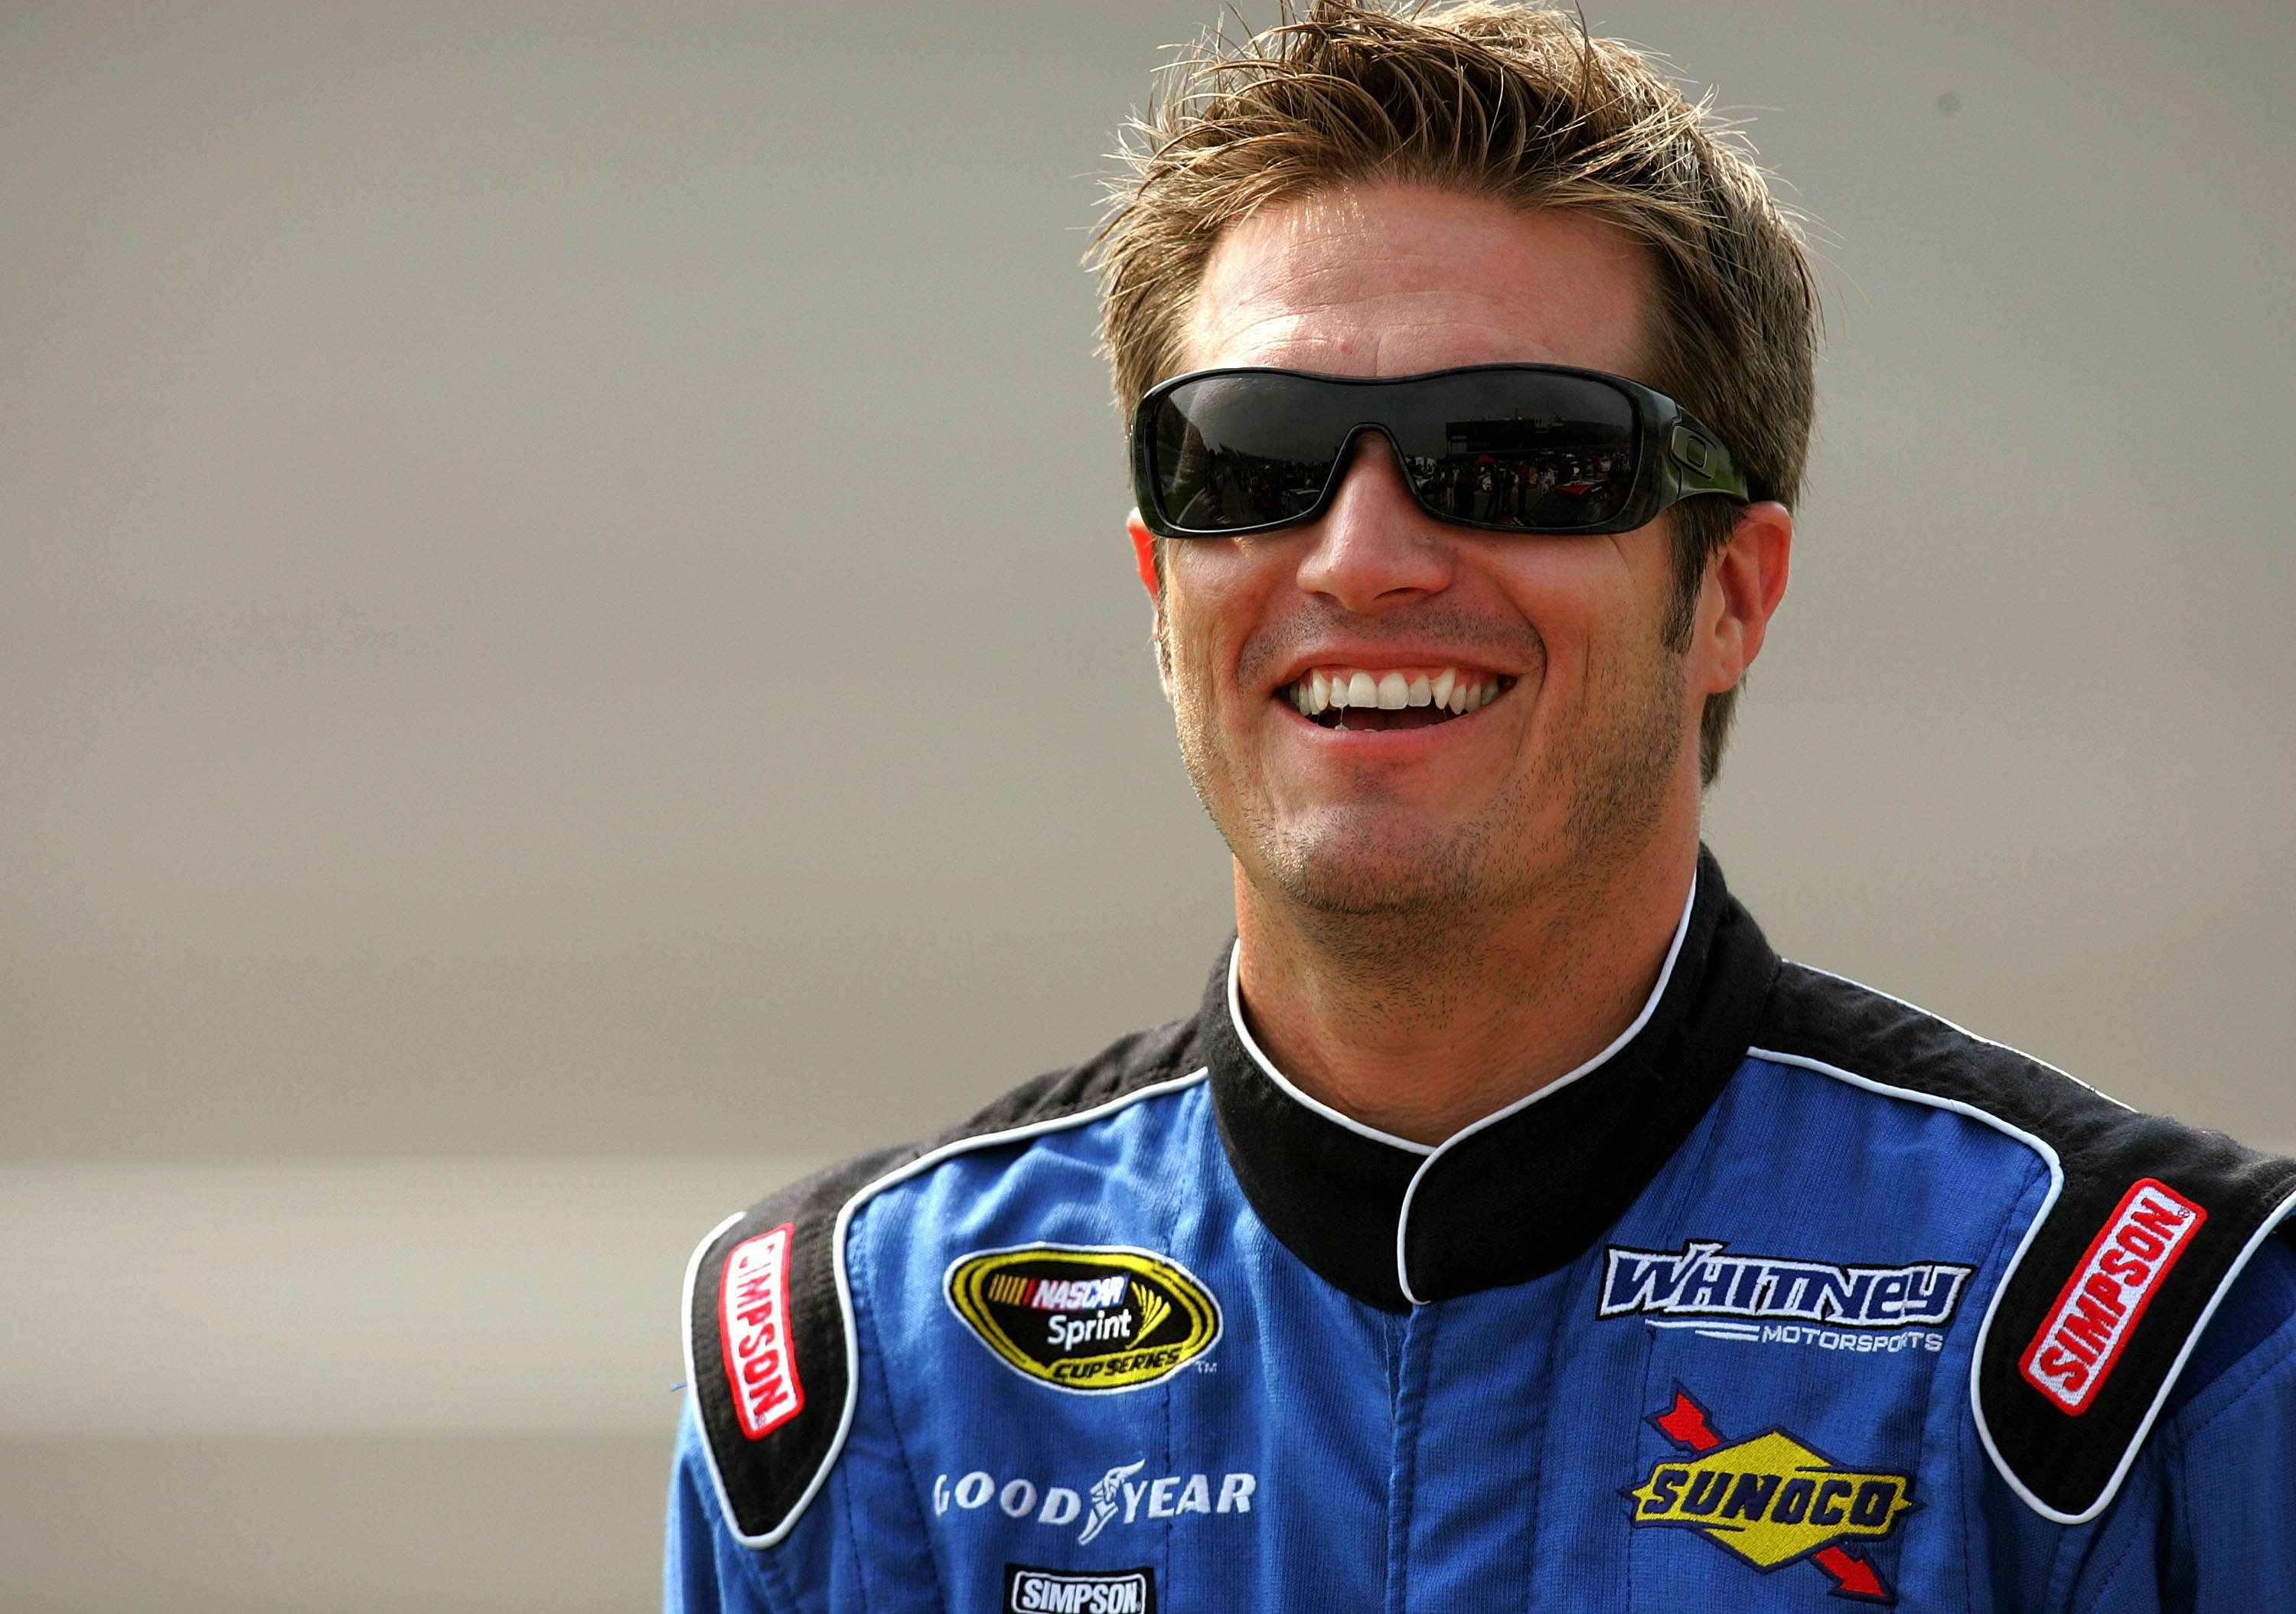 Yeley currently sits 46th in the Sprint Cup standings this season